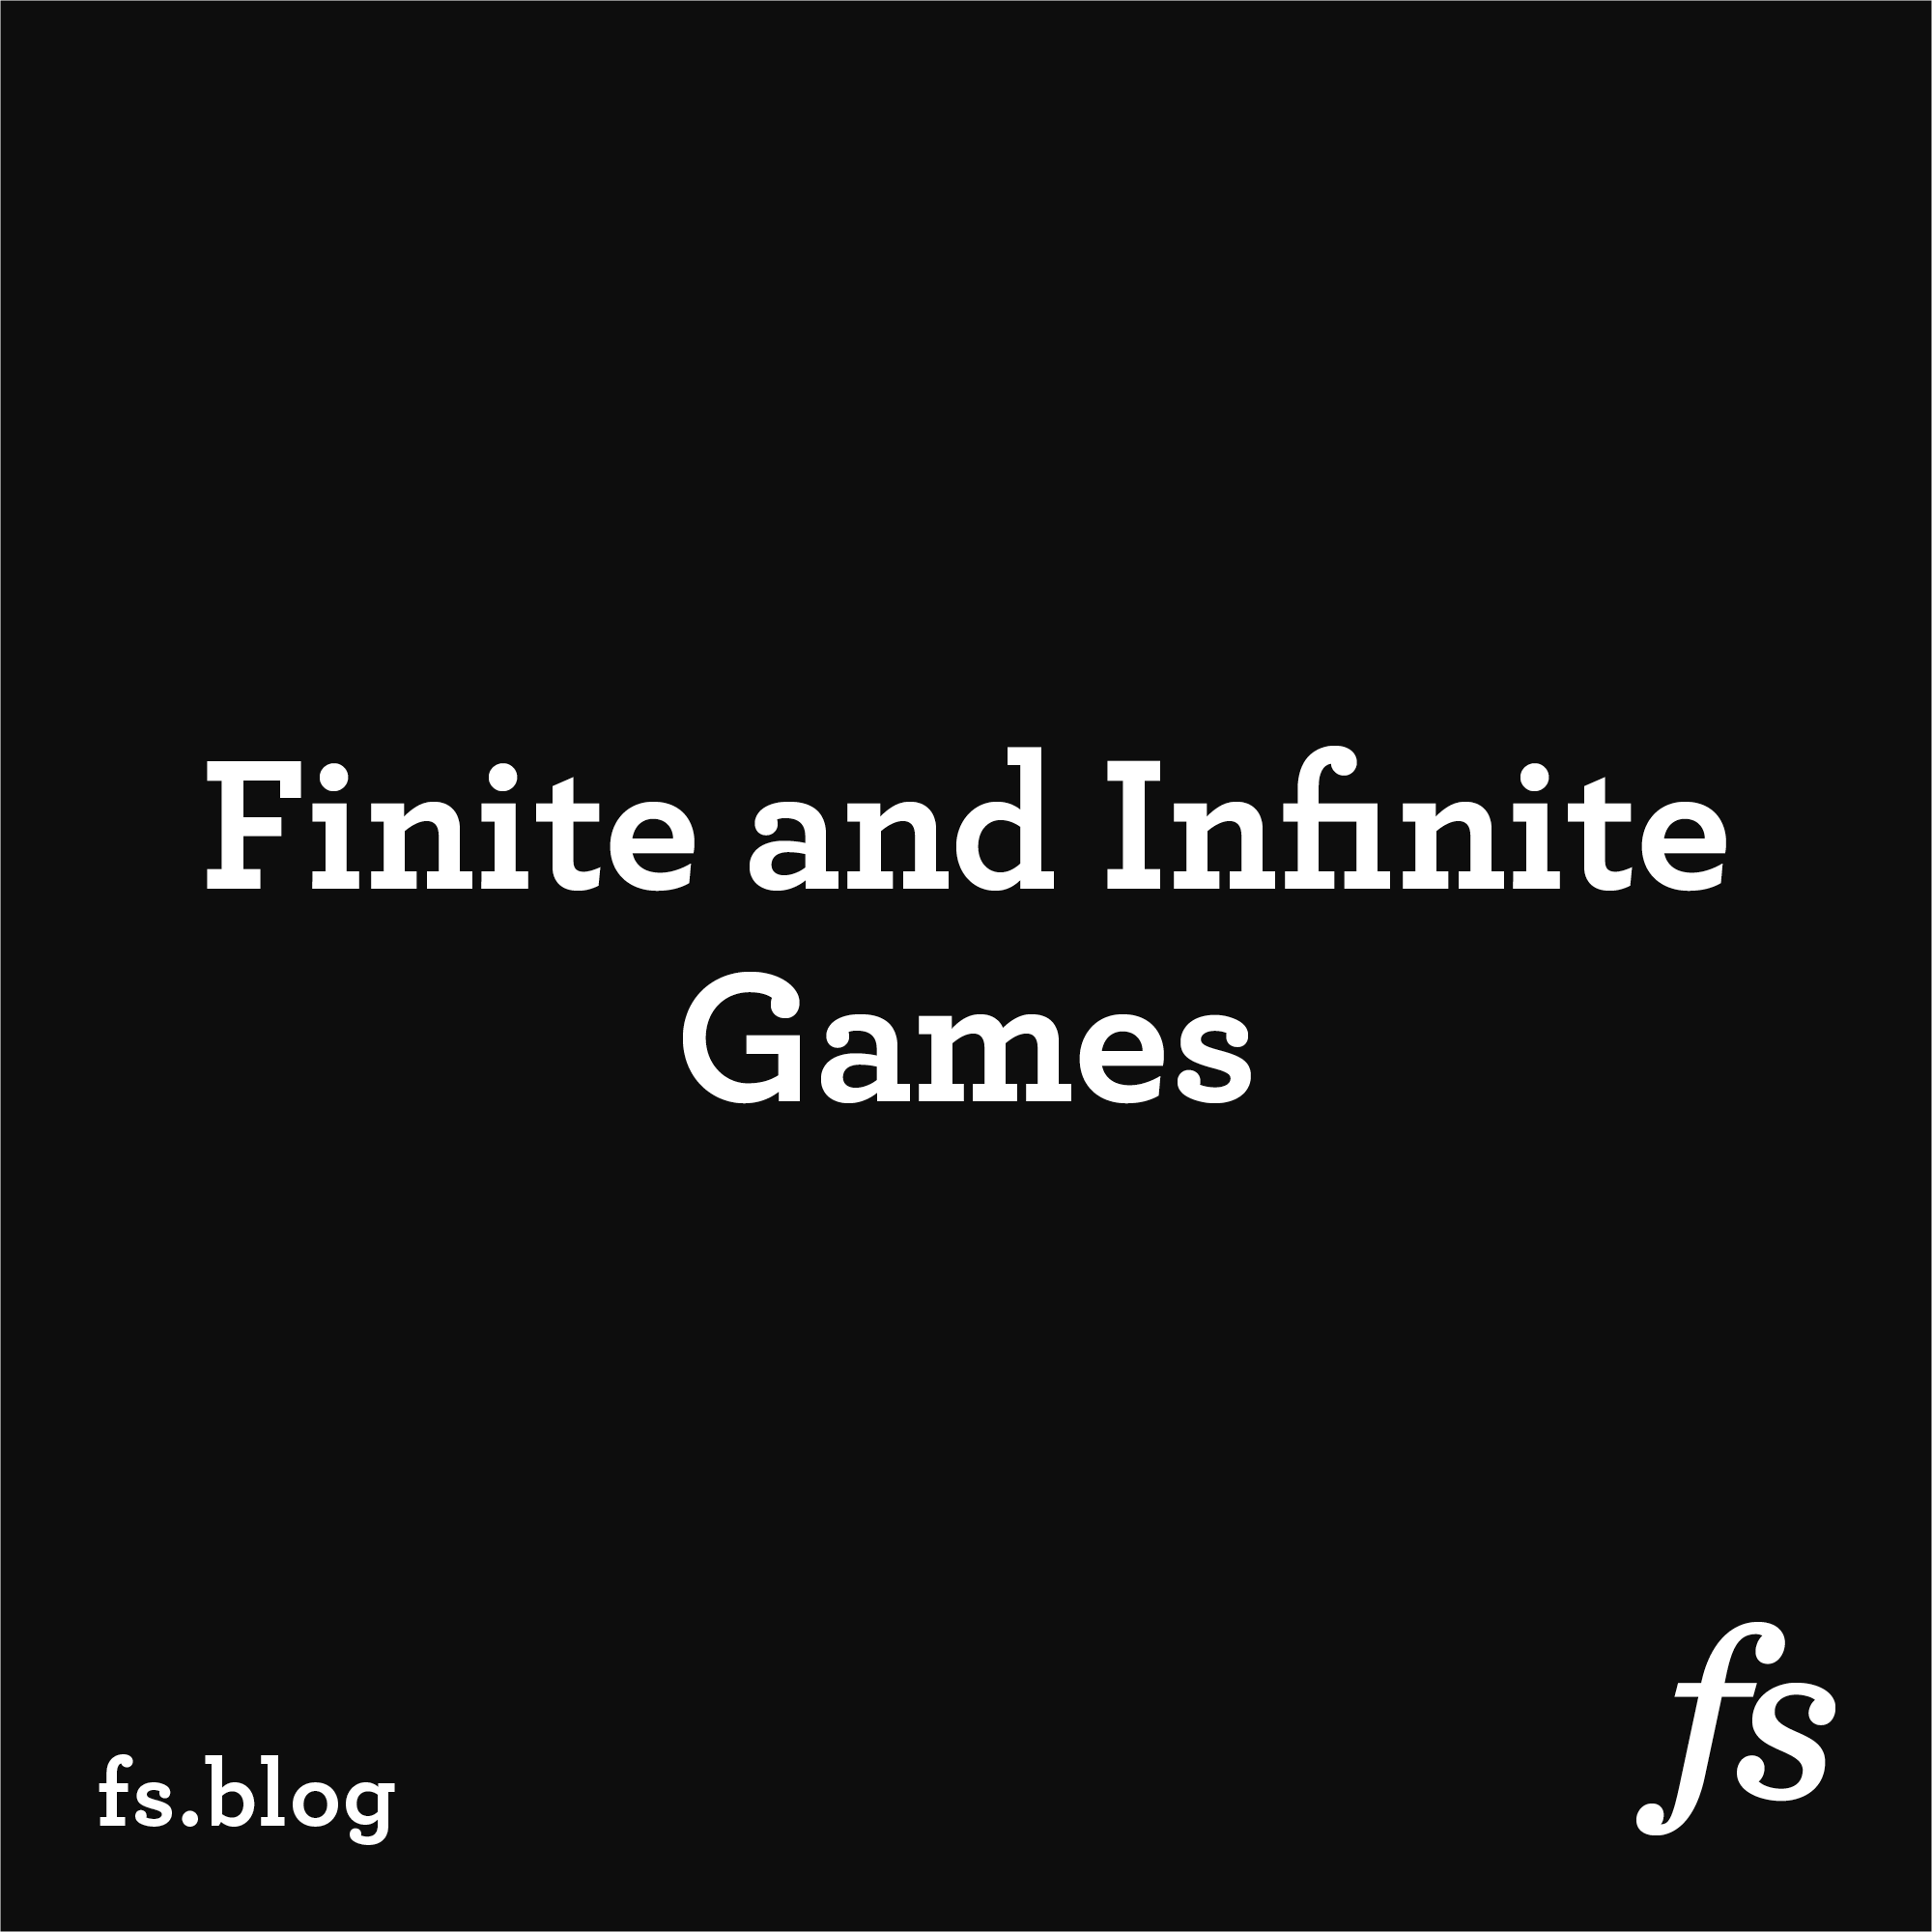 Finite and Infinite Games: Two Ways to Play the Game of Life